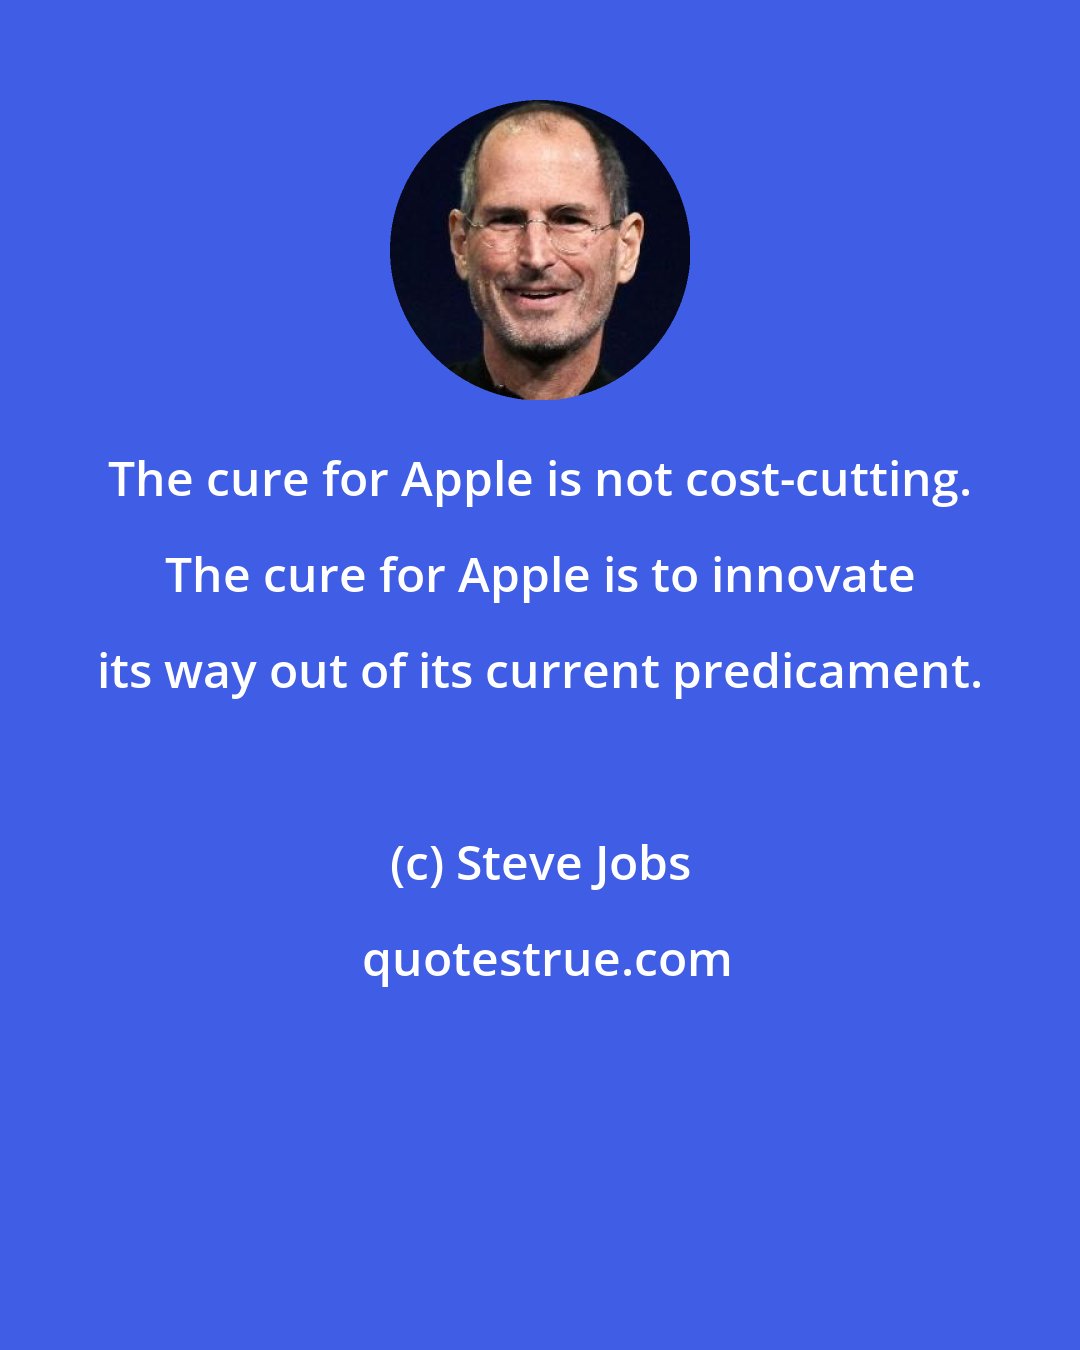 Steve Jobs: The cure for Apple is not cost-cutting. The cure for Apple is to innovate its way out of its current predicament.